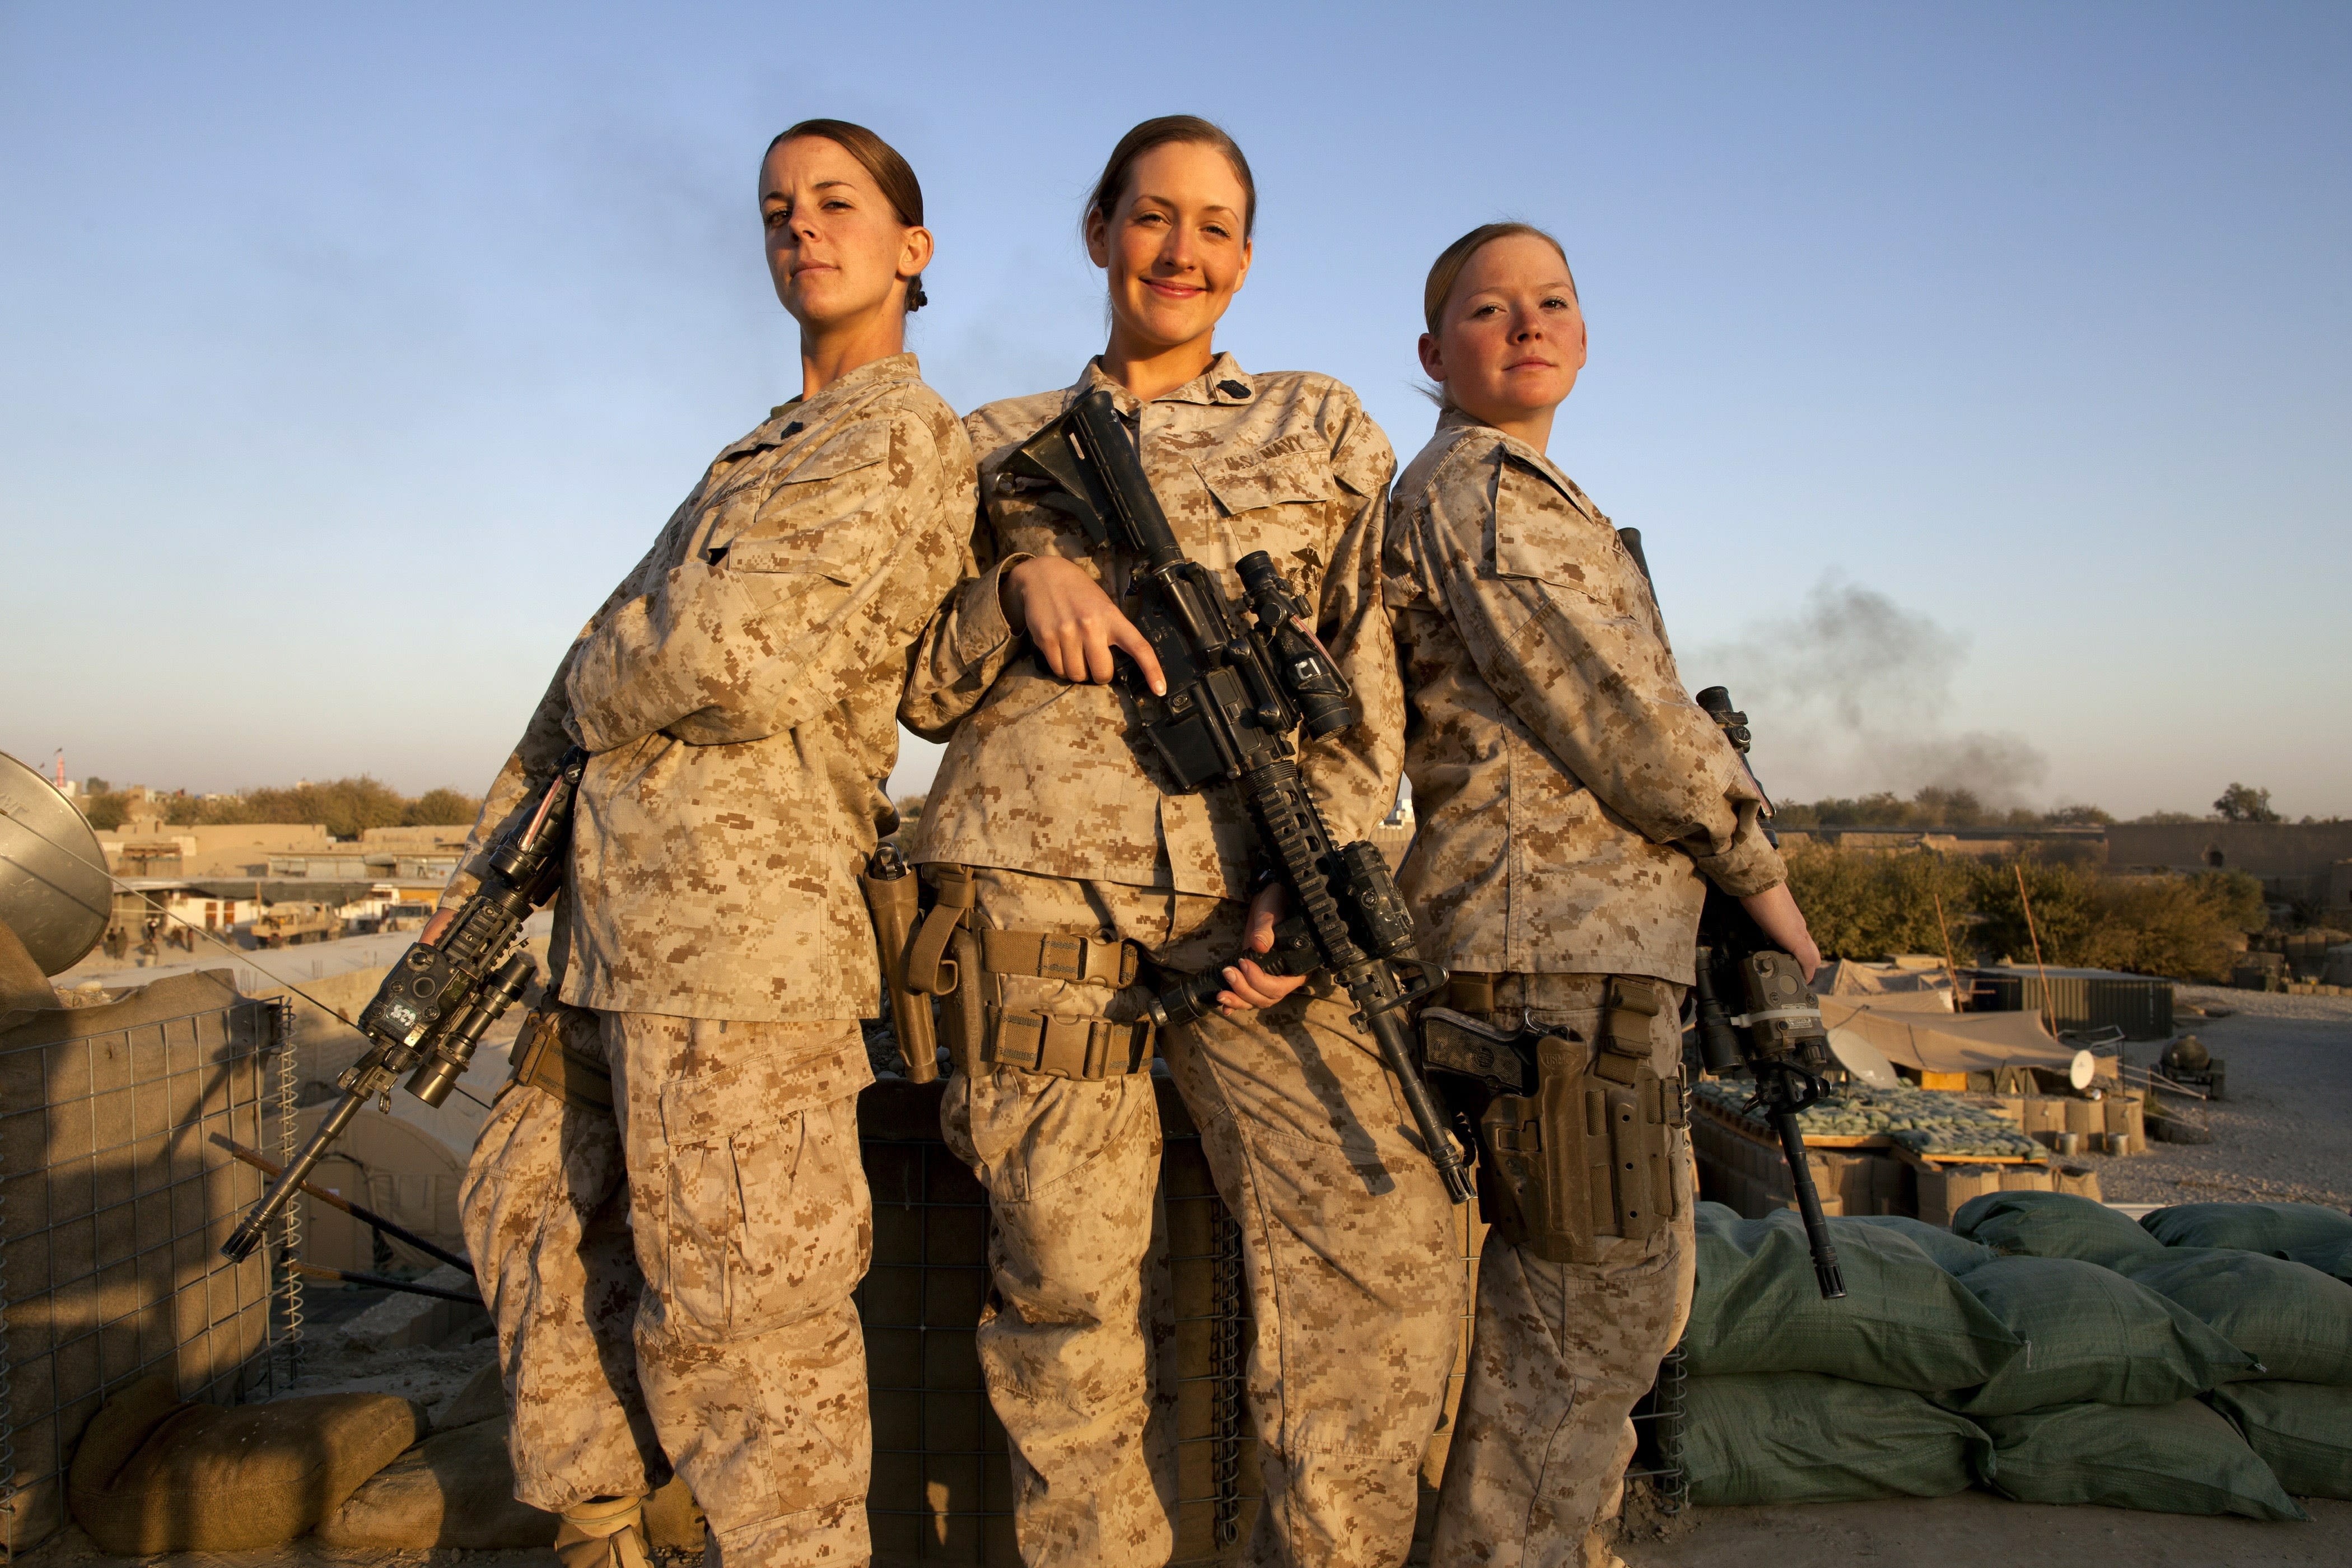 Former troops say time has come for women in combat units